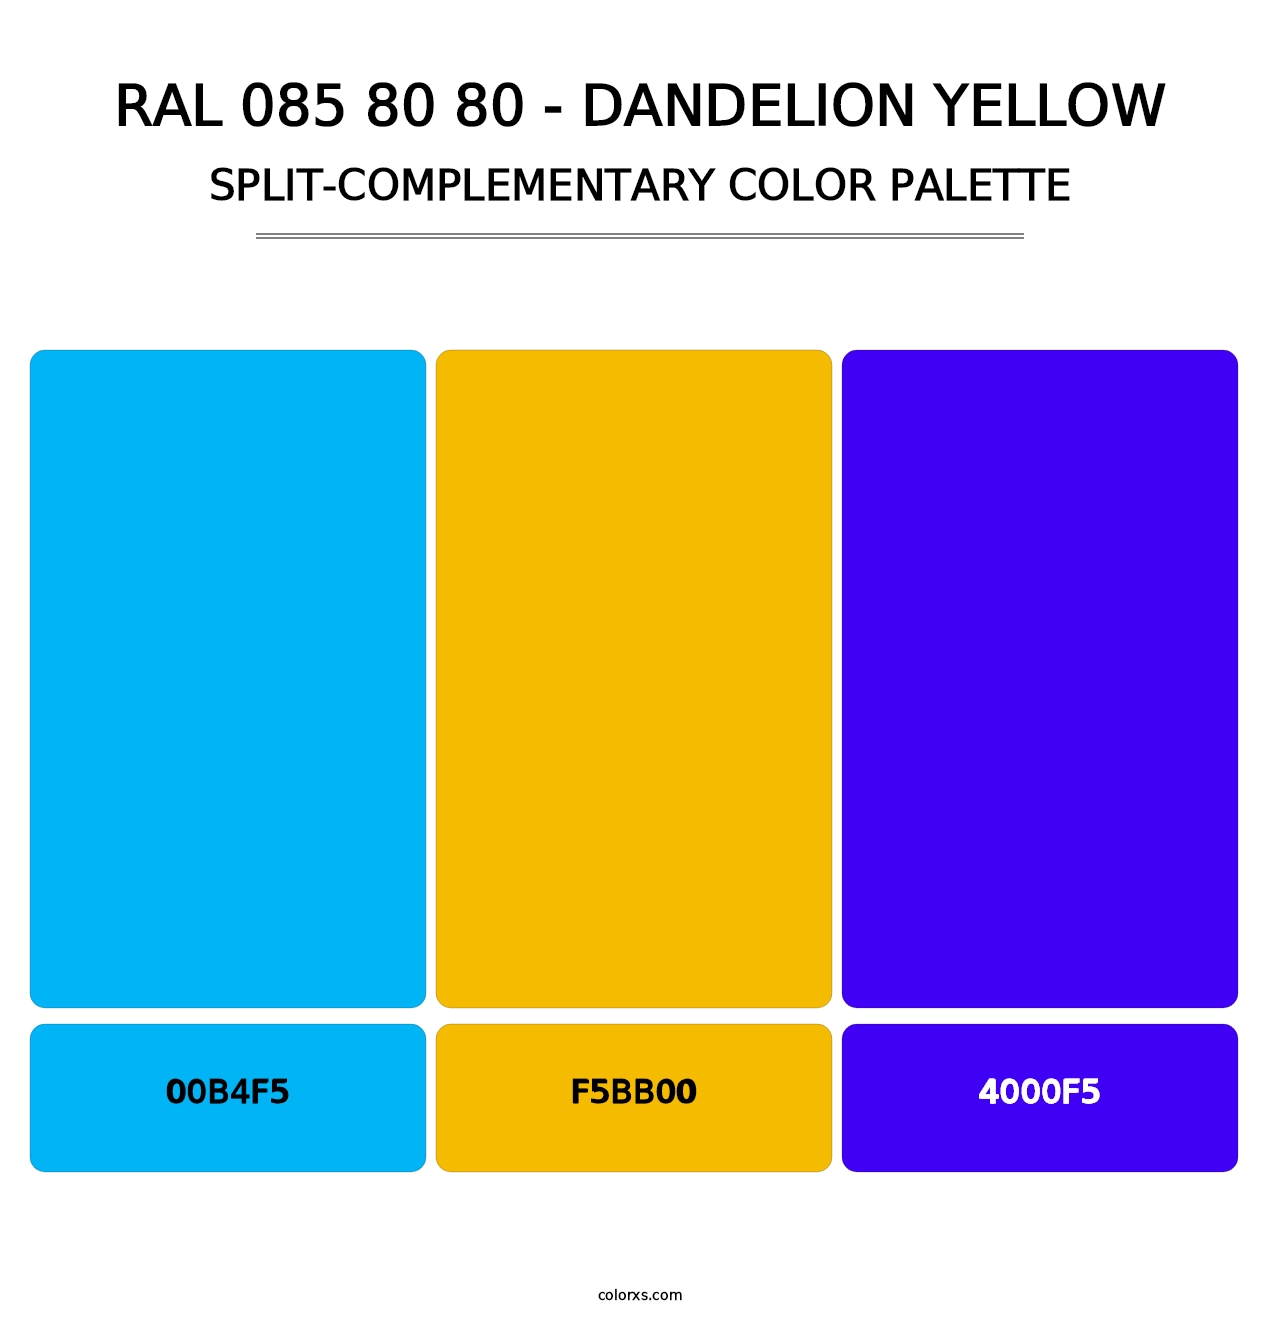 RAL 085 80 80 - Dandelion Yellow - Split-Complementary Color Palette